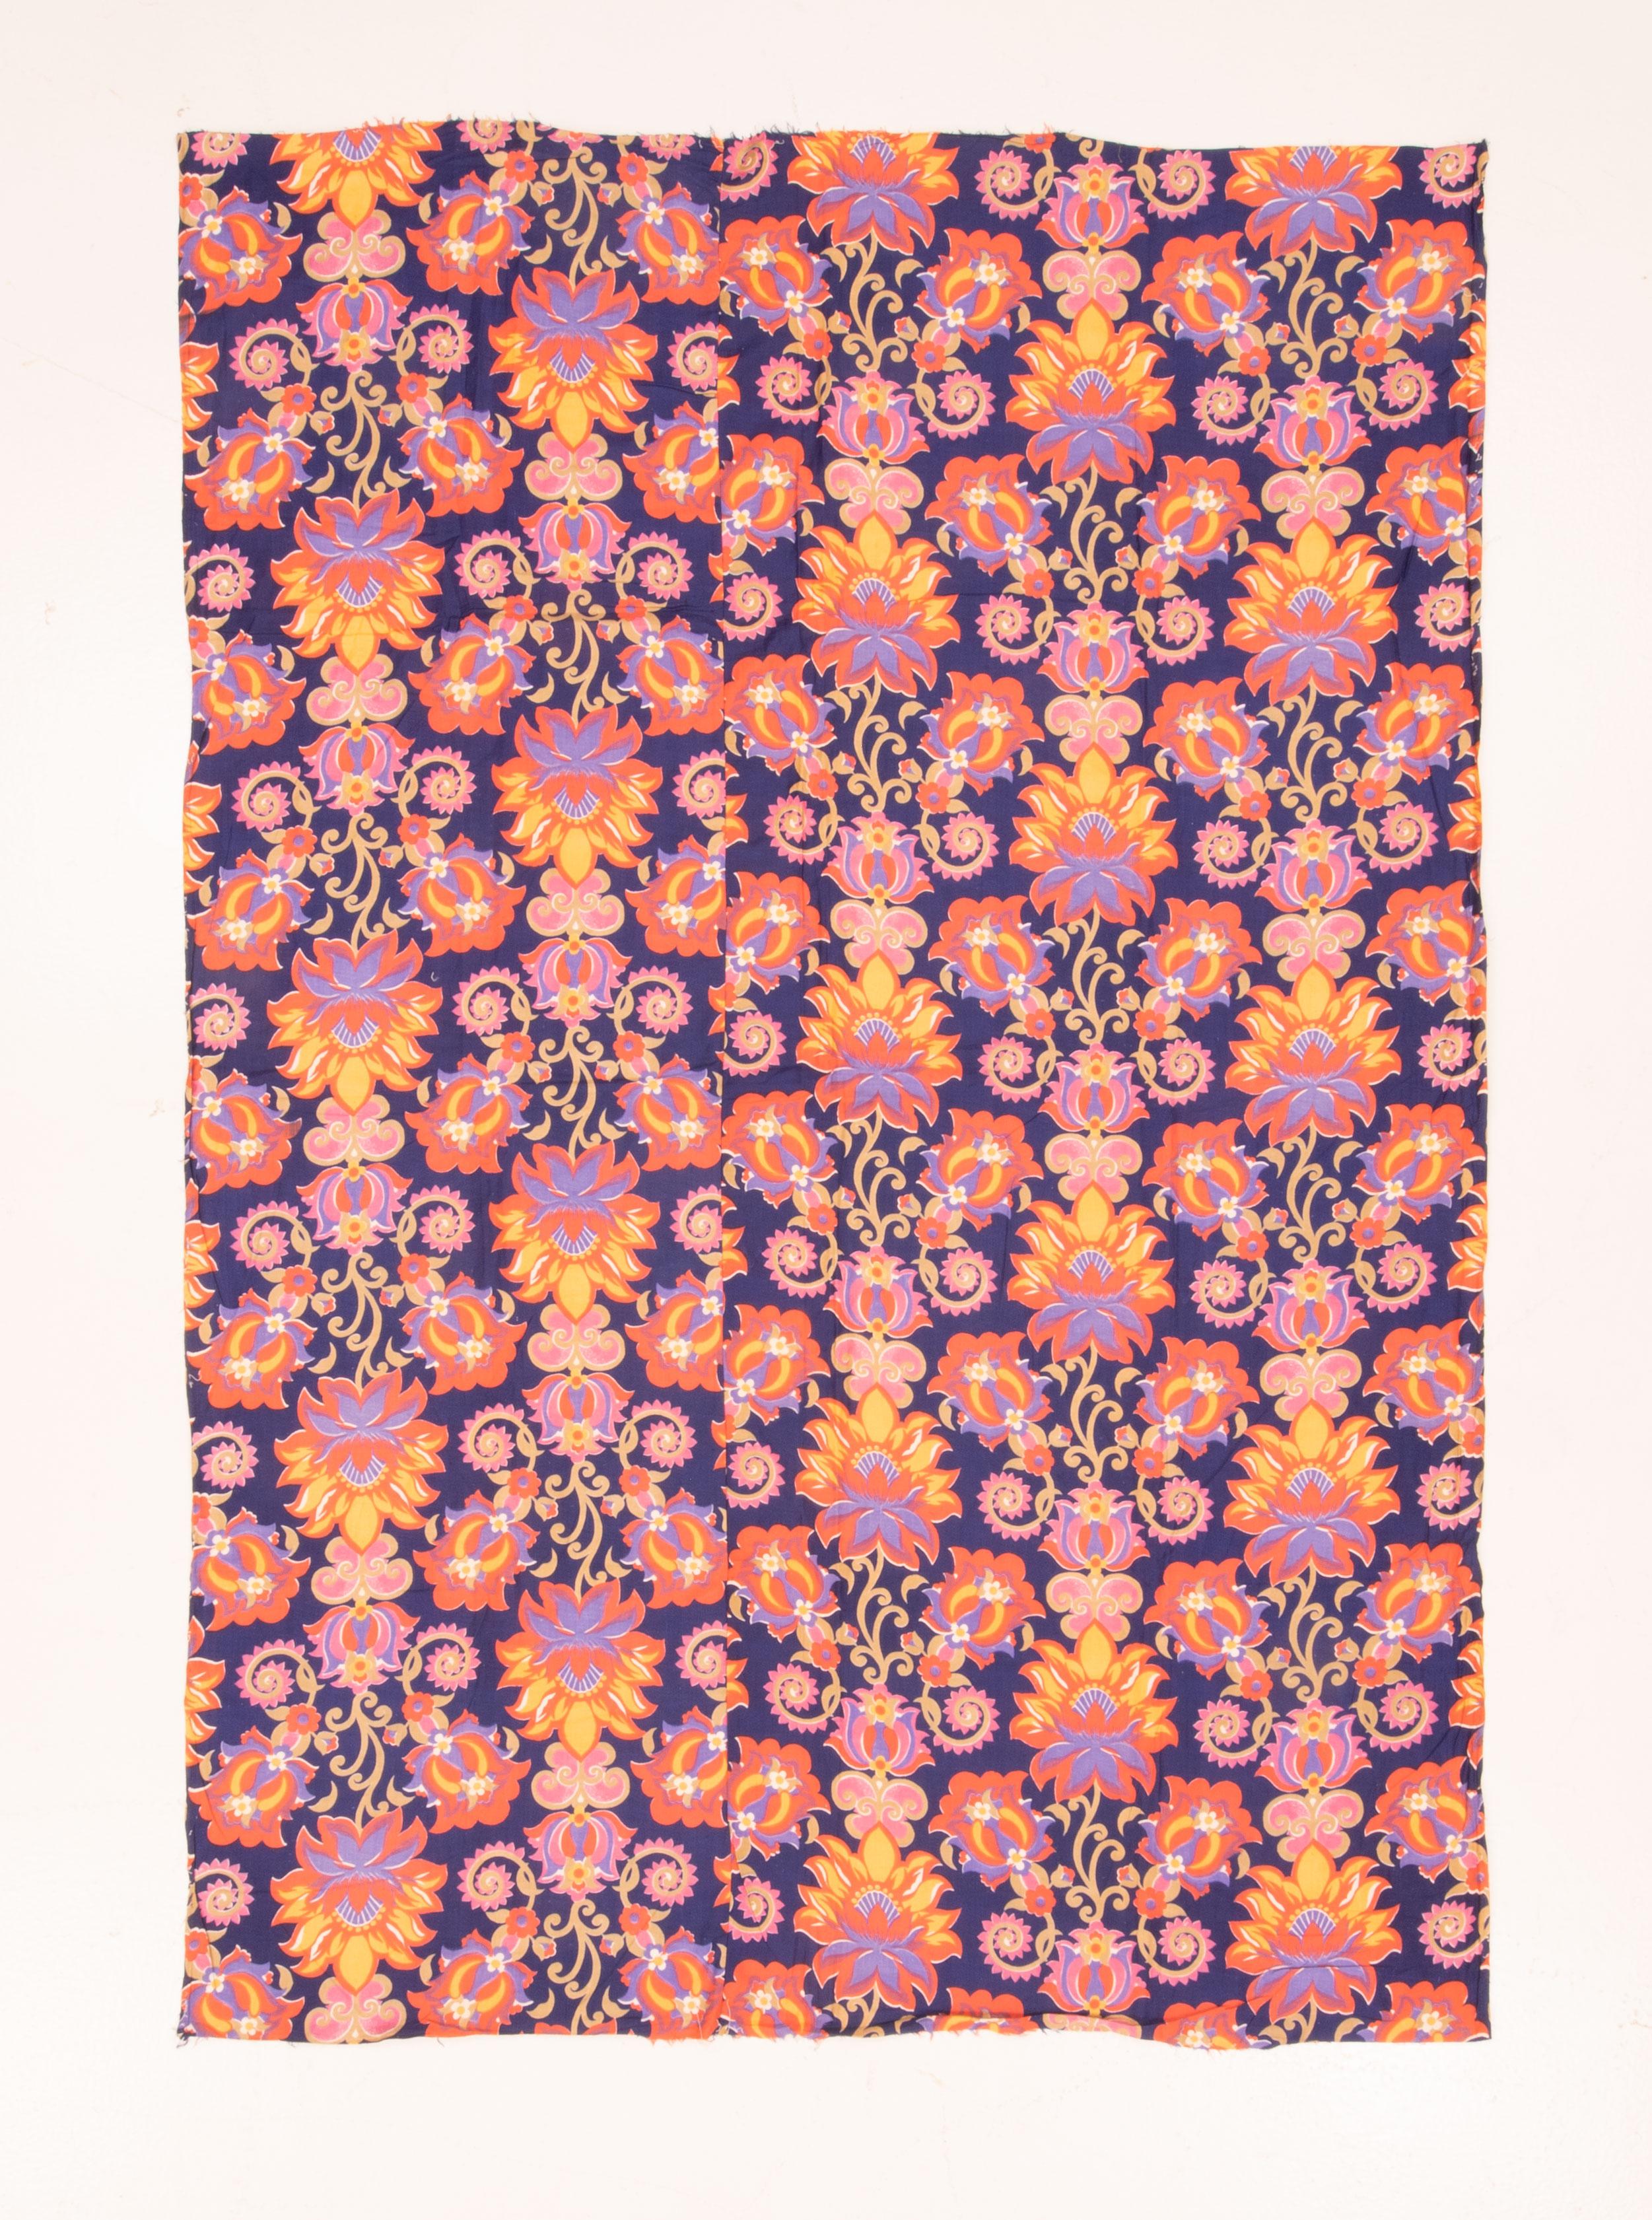 These type of Russian roller printed prints that are also called 'trade cloth' since they were made for Central Asian markets. They were used to make blankets and dresses, and also used for the lining of ikat chapans.